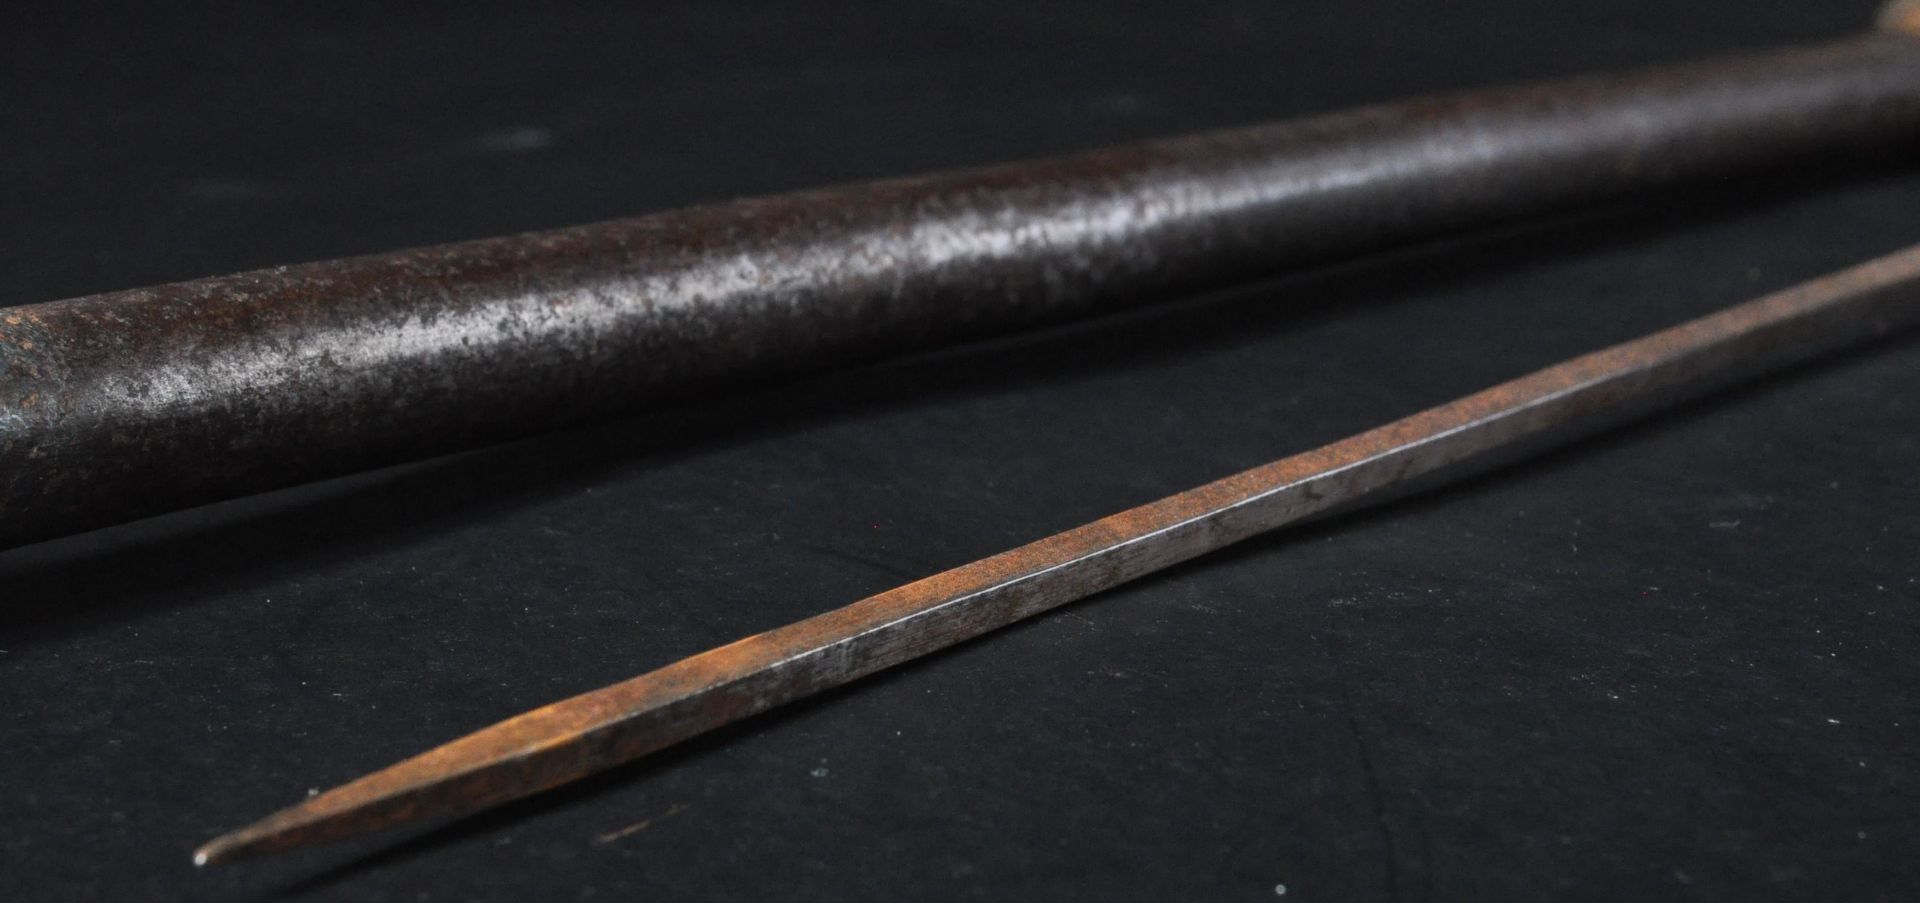 18TH CENTURY INDIAN FAKIR CRUTCH WITH CONCEALED BLADE - Image 10 of 10